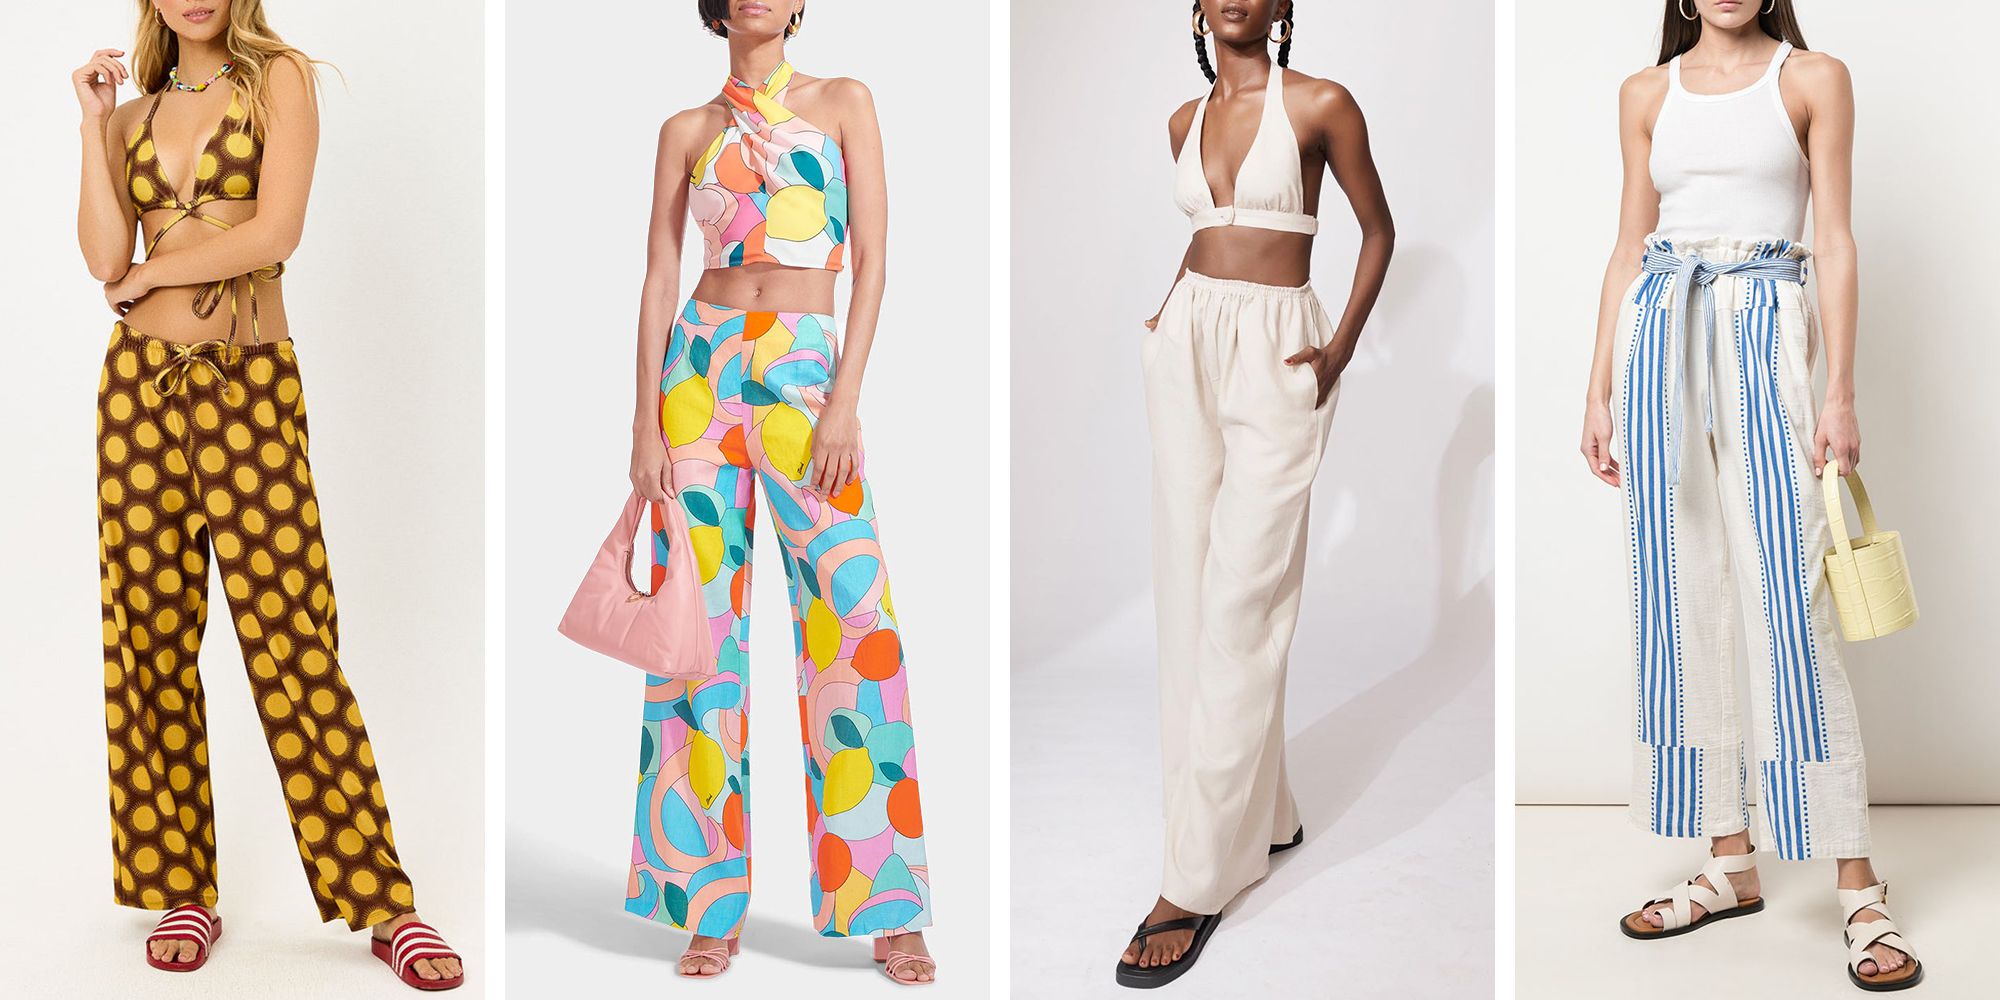 20 Beach Pants To Try This Summer if Cover-Ups Just Aren’t Your Thing